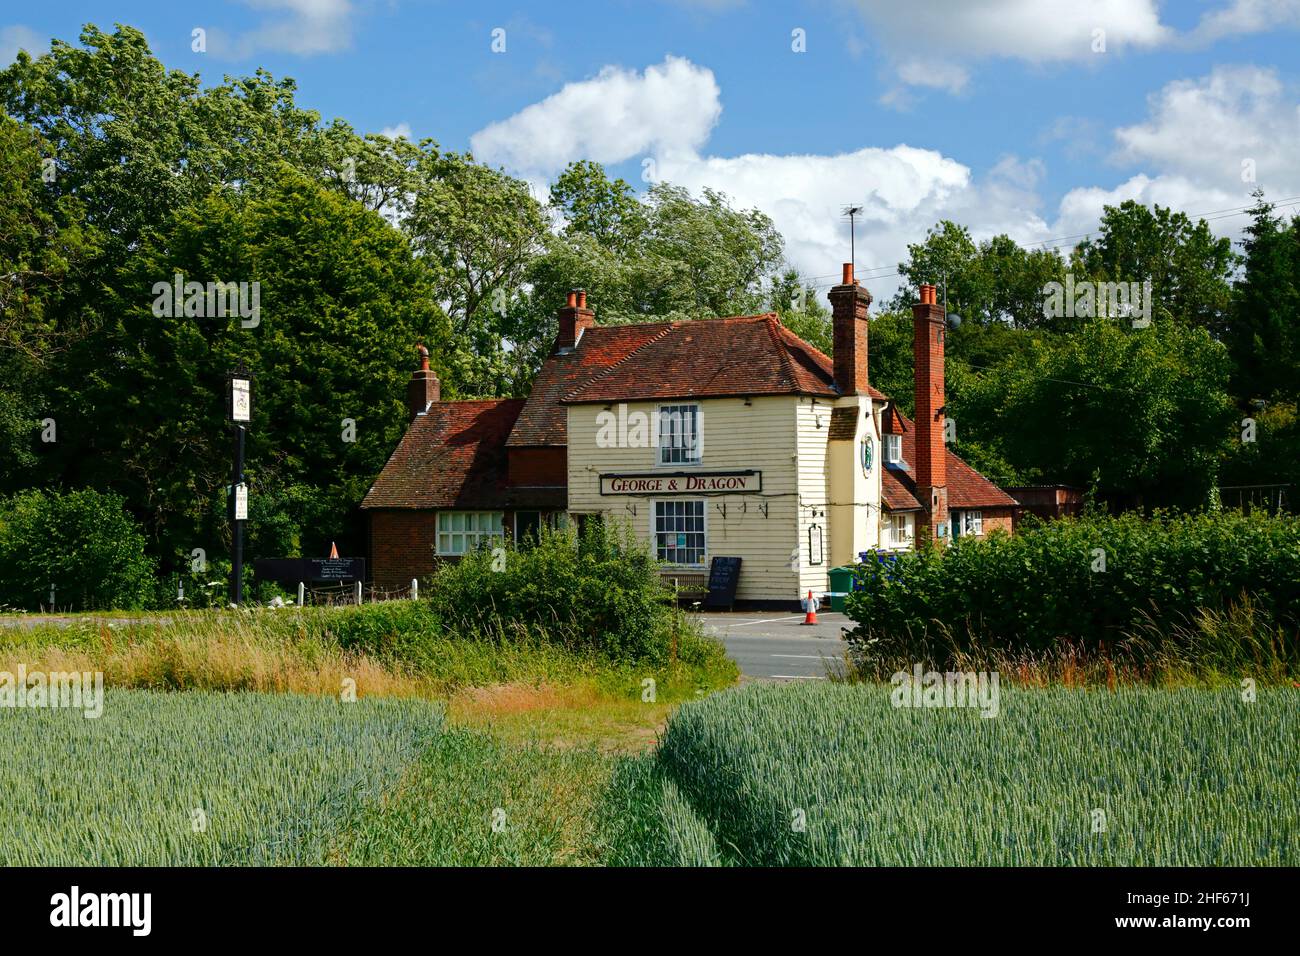 The George & Dragon At Tudeley public house on Five Oak Green Road between Tudeley and Capel, Kent, England. Field of young wheat in foreground. Stock Photo